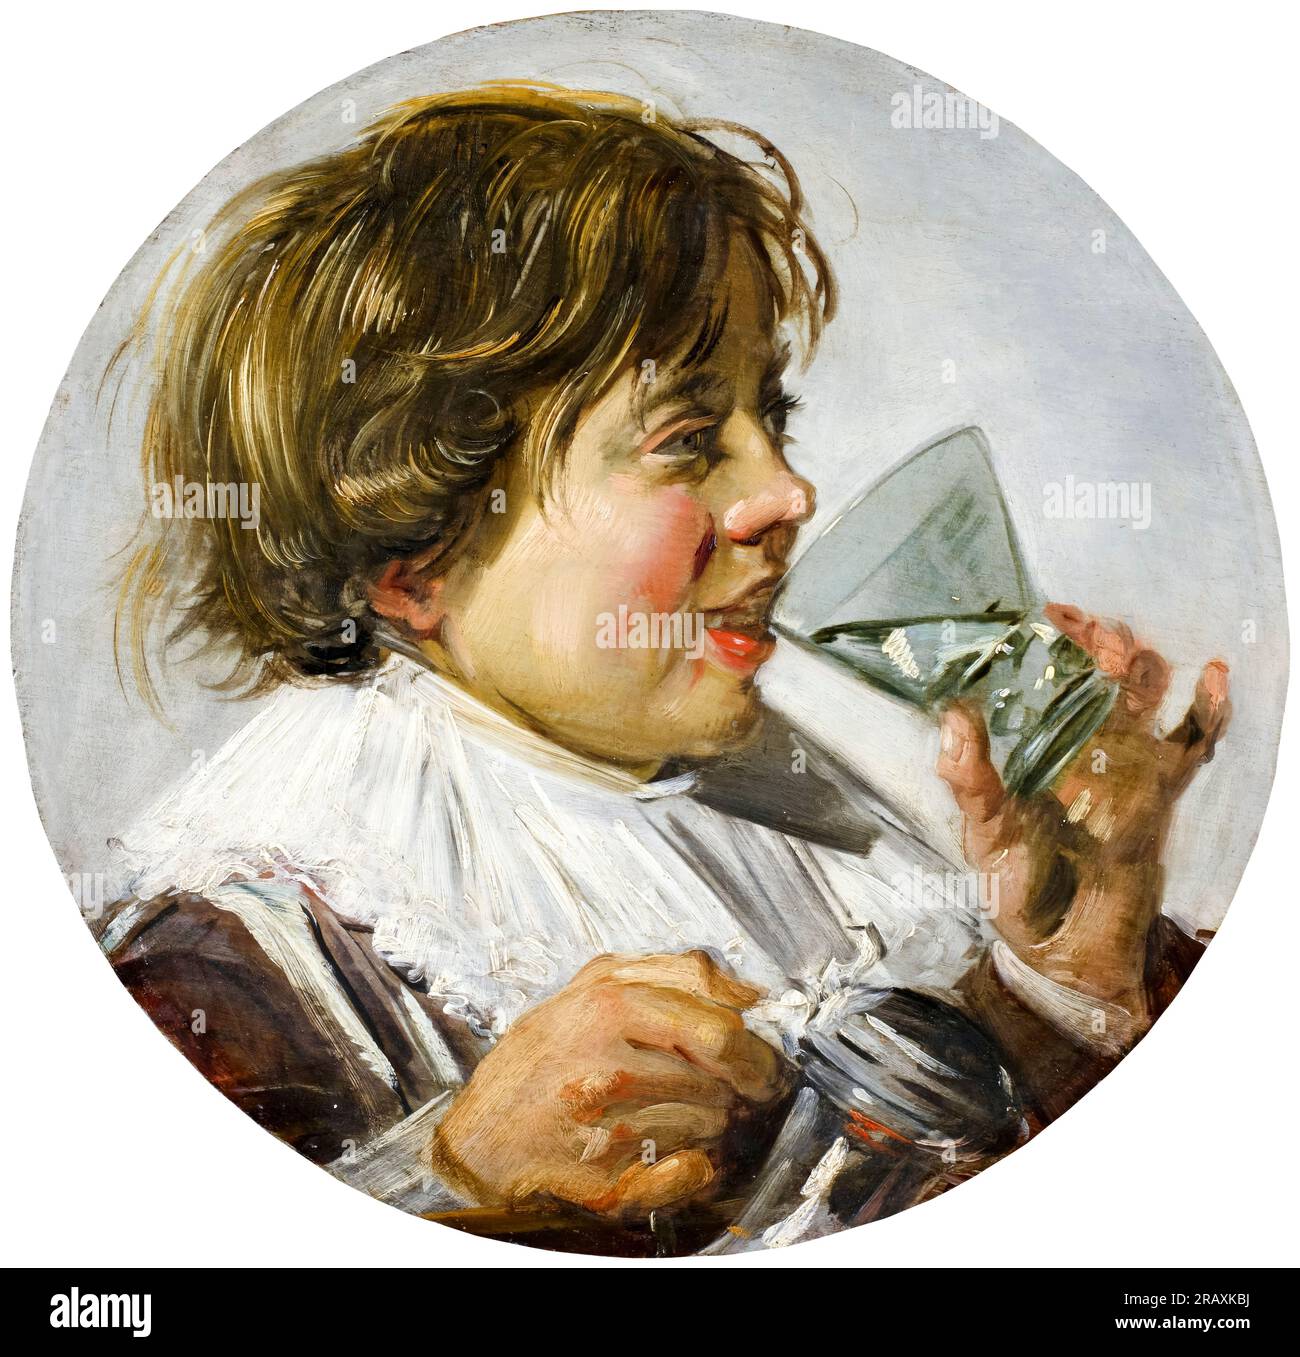 Frans Hals, Drinking Boy (Taste), Boy with a glass and a pewter Jug, ritratto dipinto ad olio su pannello, 1625-1628 Foto Stock